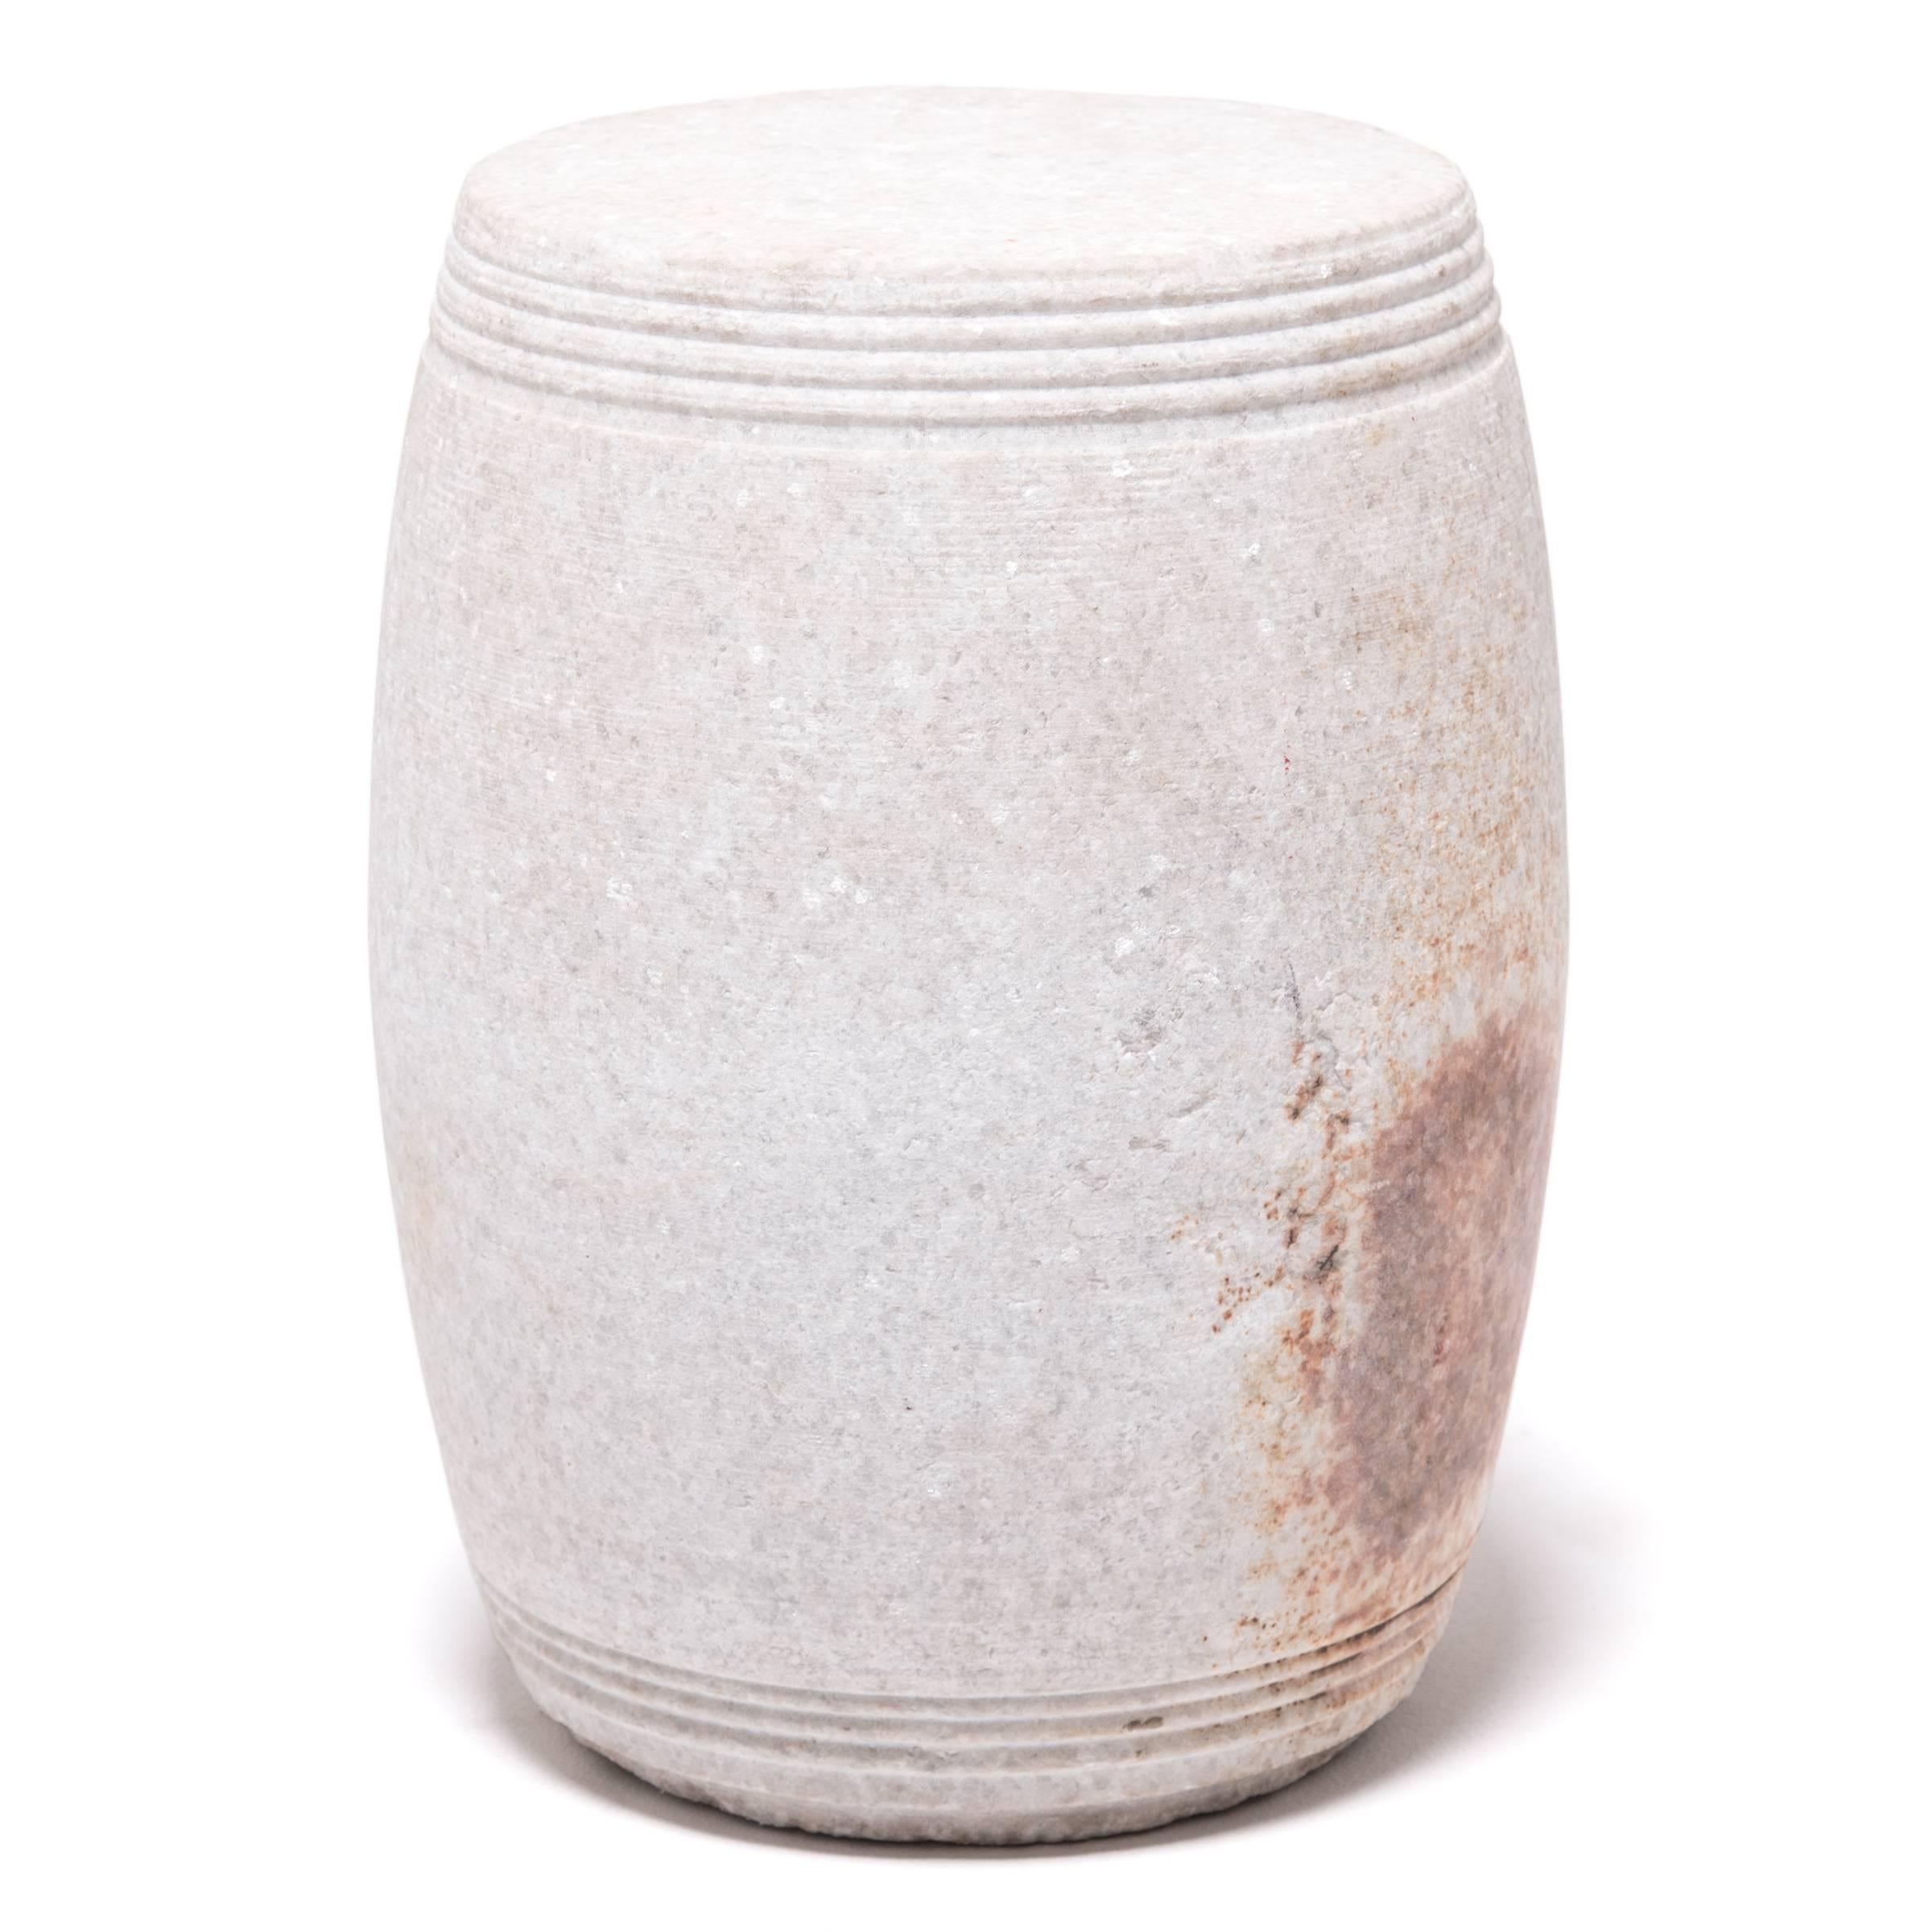 This drum-form object is carved from a single piece of marble. Around the top and bottom are delicate, incised concentric ribs. Stone furniture like this was commonly placed in Chinese gardens and courtyards to reduce the amount of indoor furniture